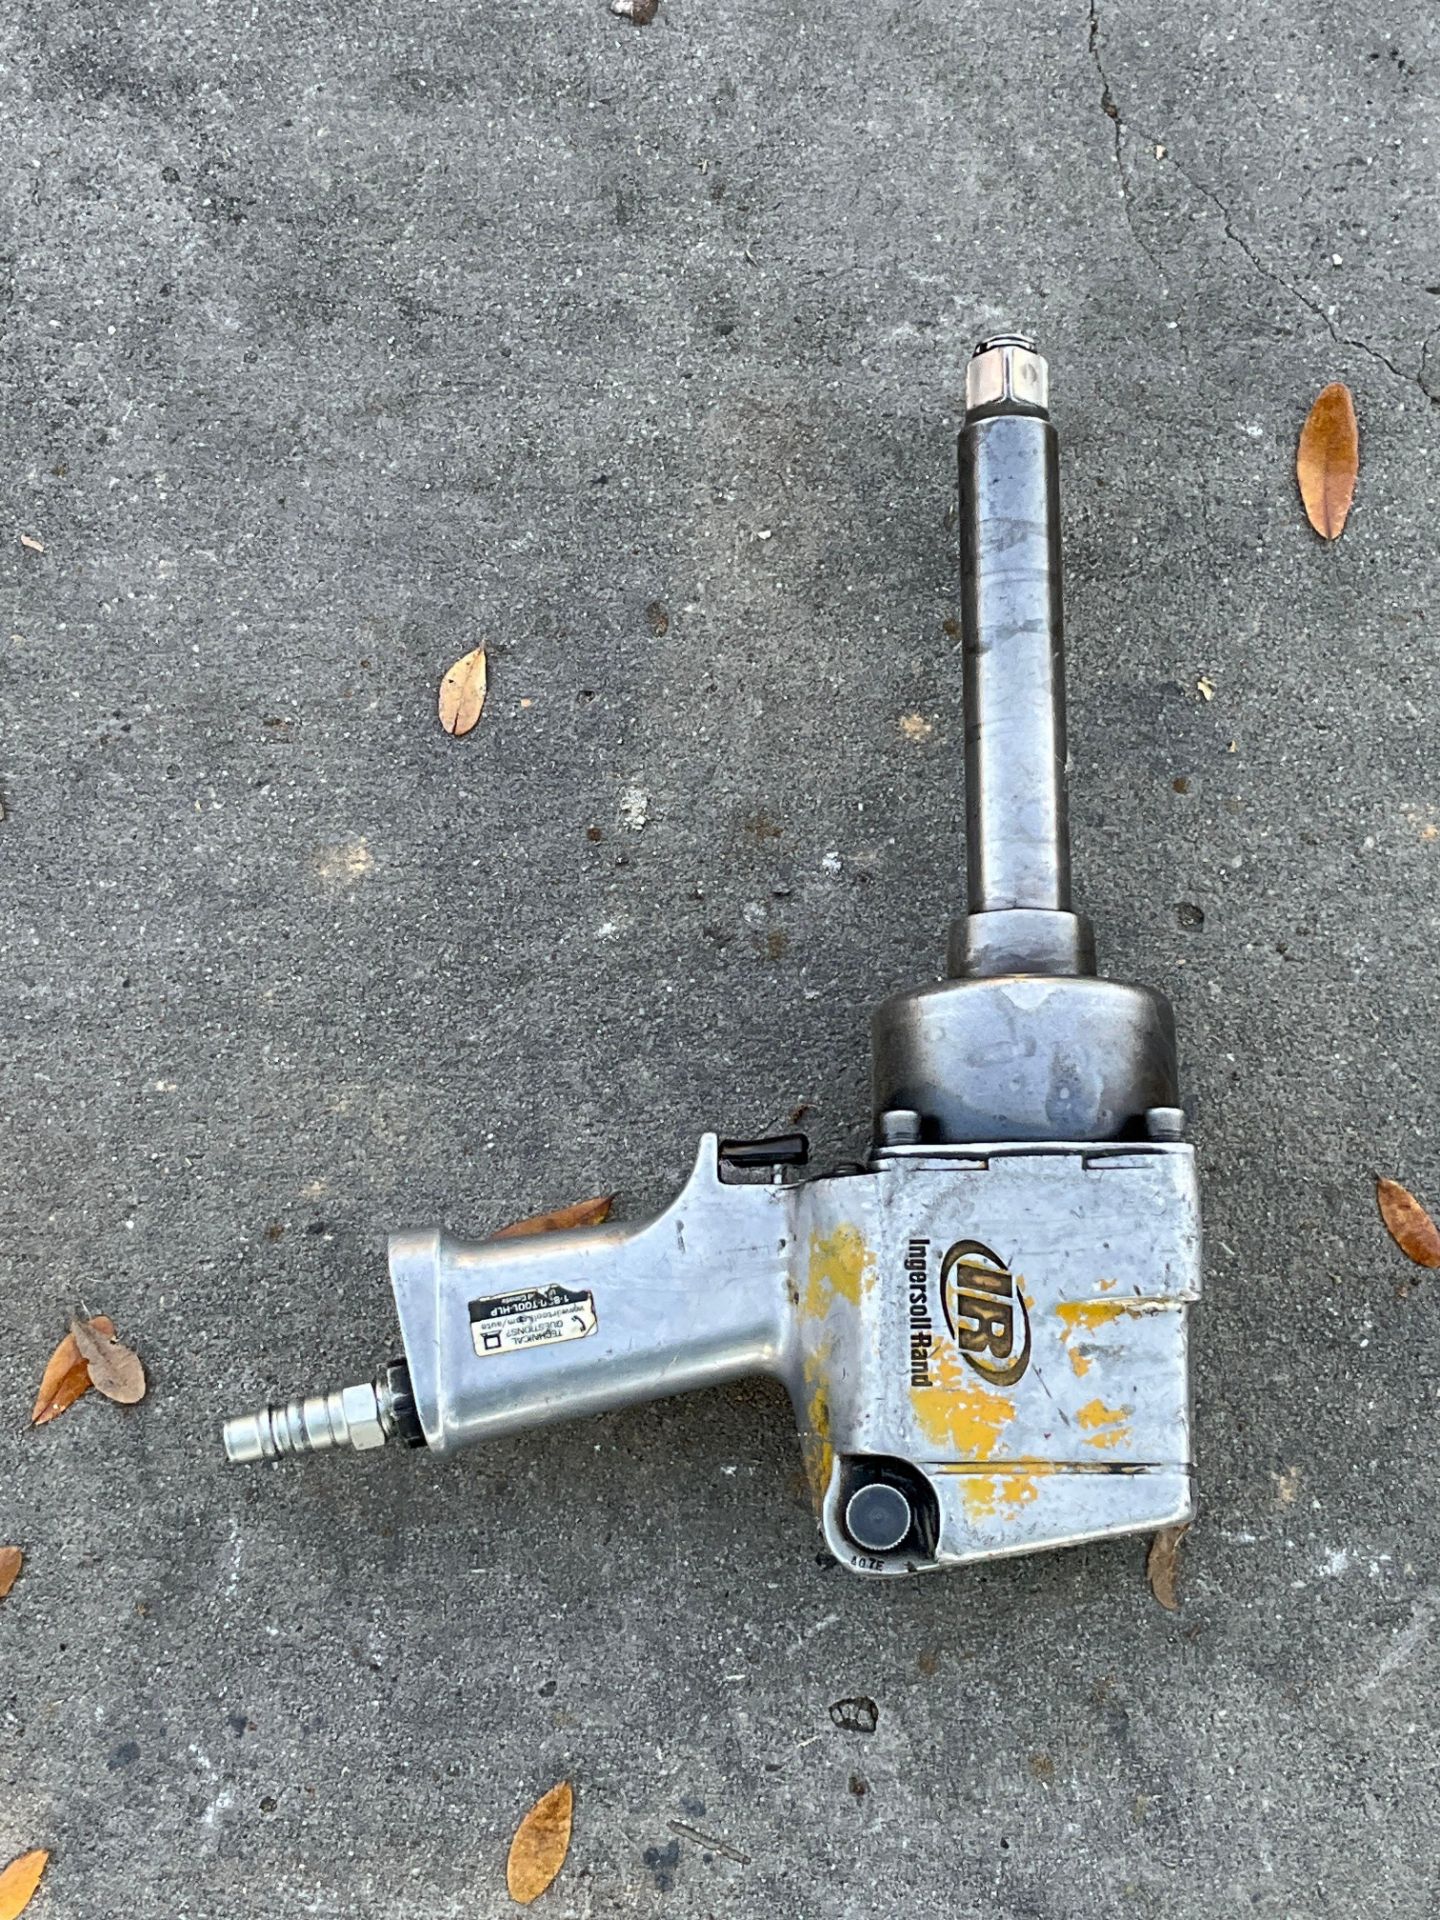 INGERSOLL-RAND 261 3/4" PNEUMATIC IMPACT WRENCH , APPROX 90 PSI, APPROX 6.2 BAR, APPROX 5,500 RPM - Image 4 of 7